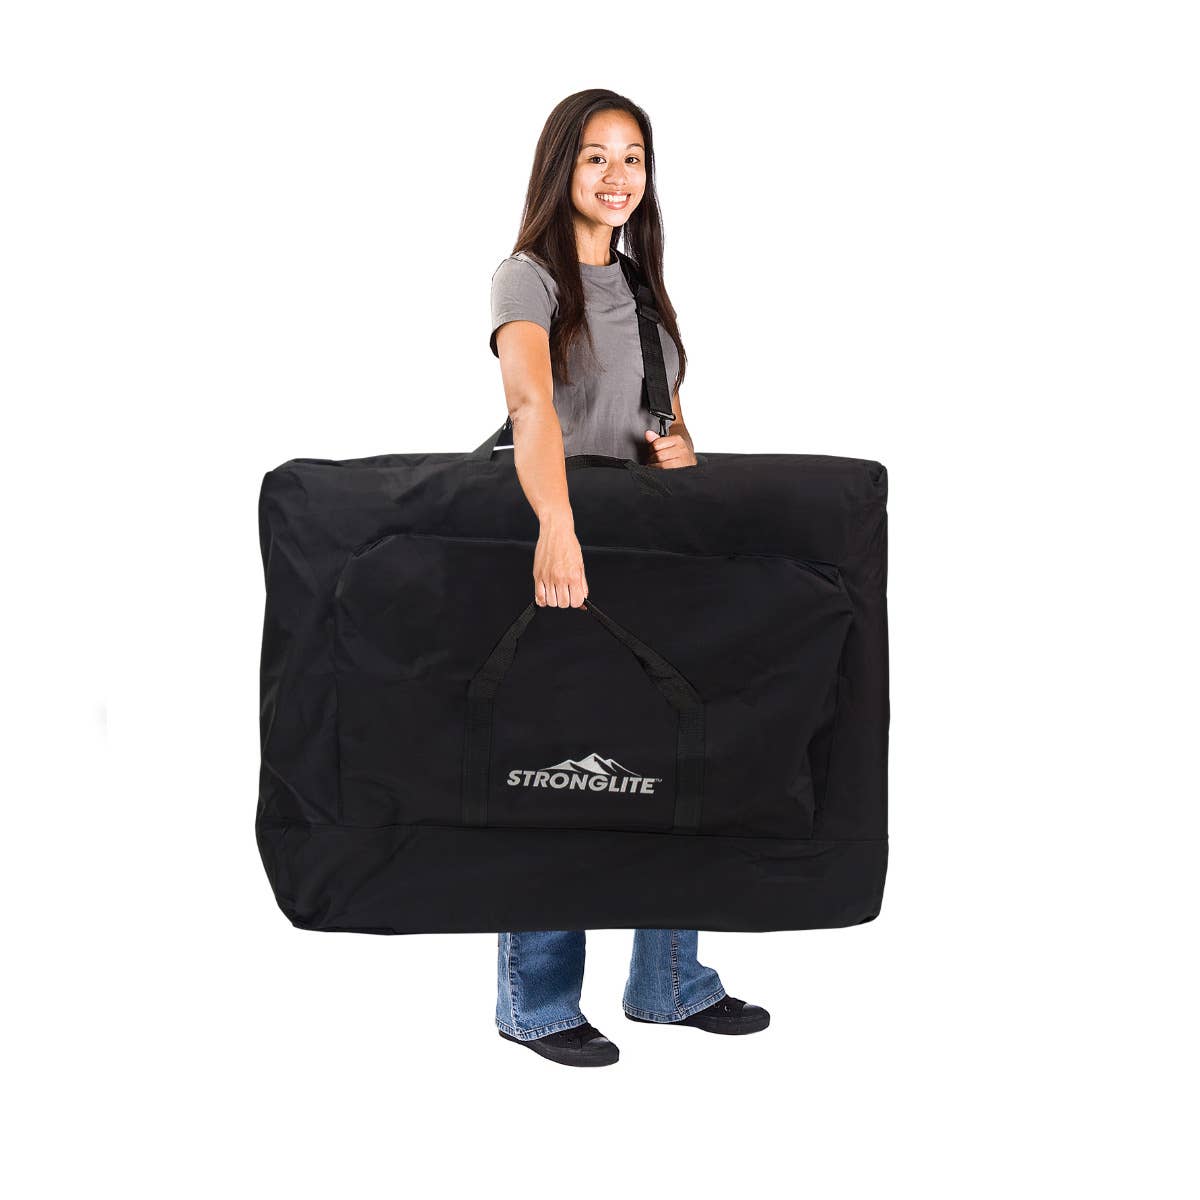 Stronglite portable massage table carrying case strap design and single pocket for accessories.